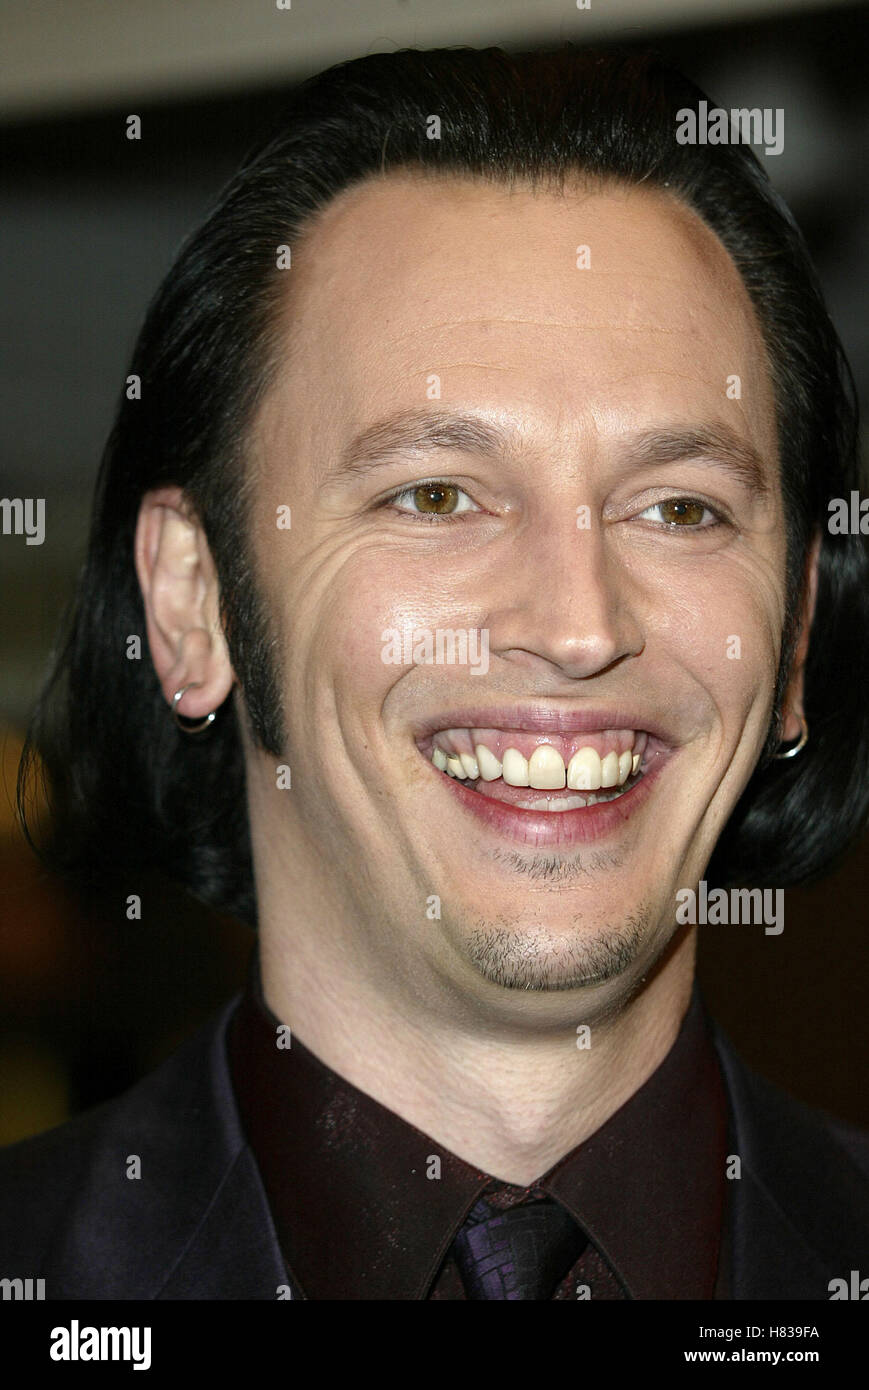 STEVE VALENTINE THE TIME MACHINE FILM PREMIERE WESTWOOD LOS ANGELES USA 04 March 2002 Stock Photo